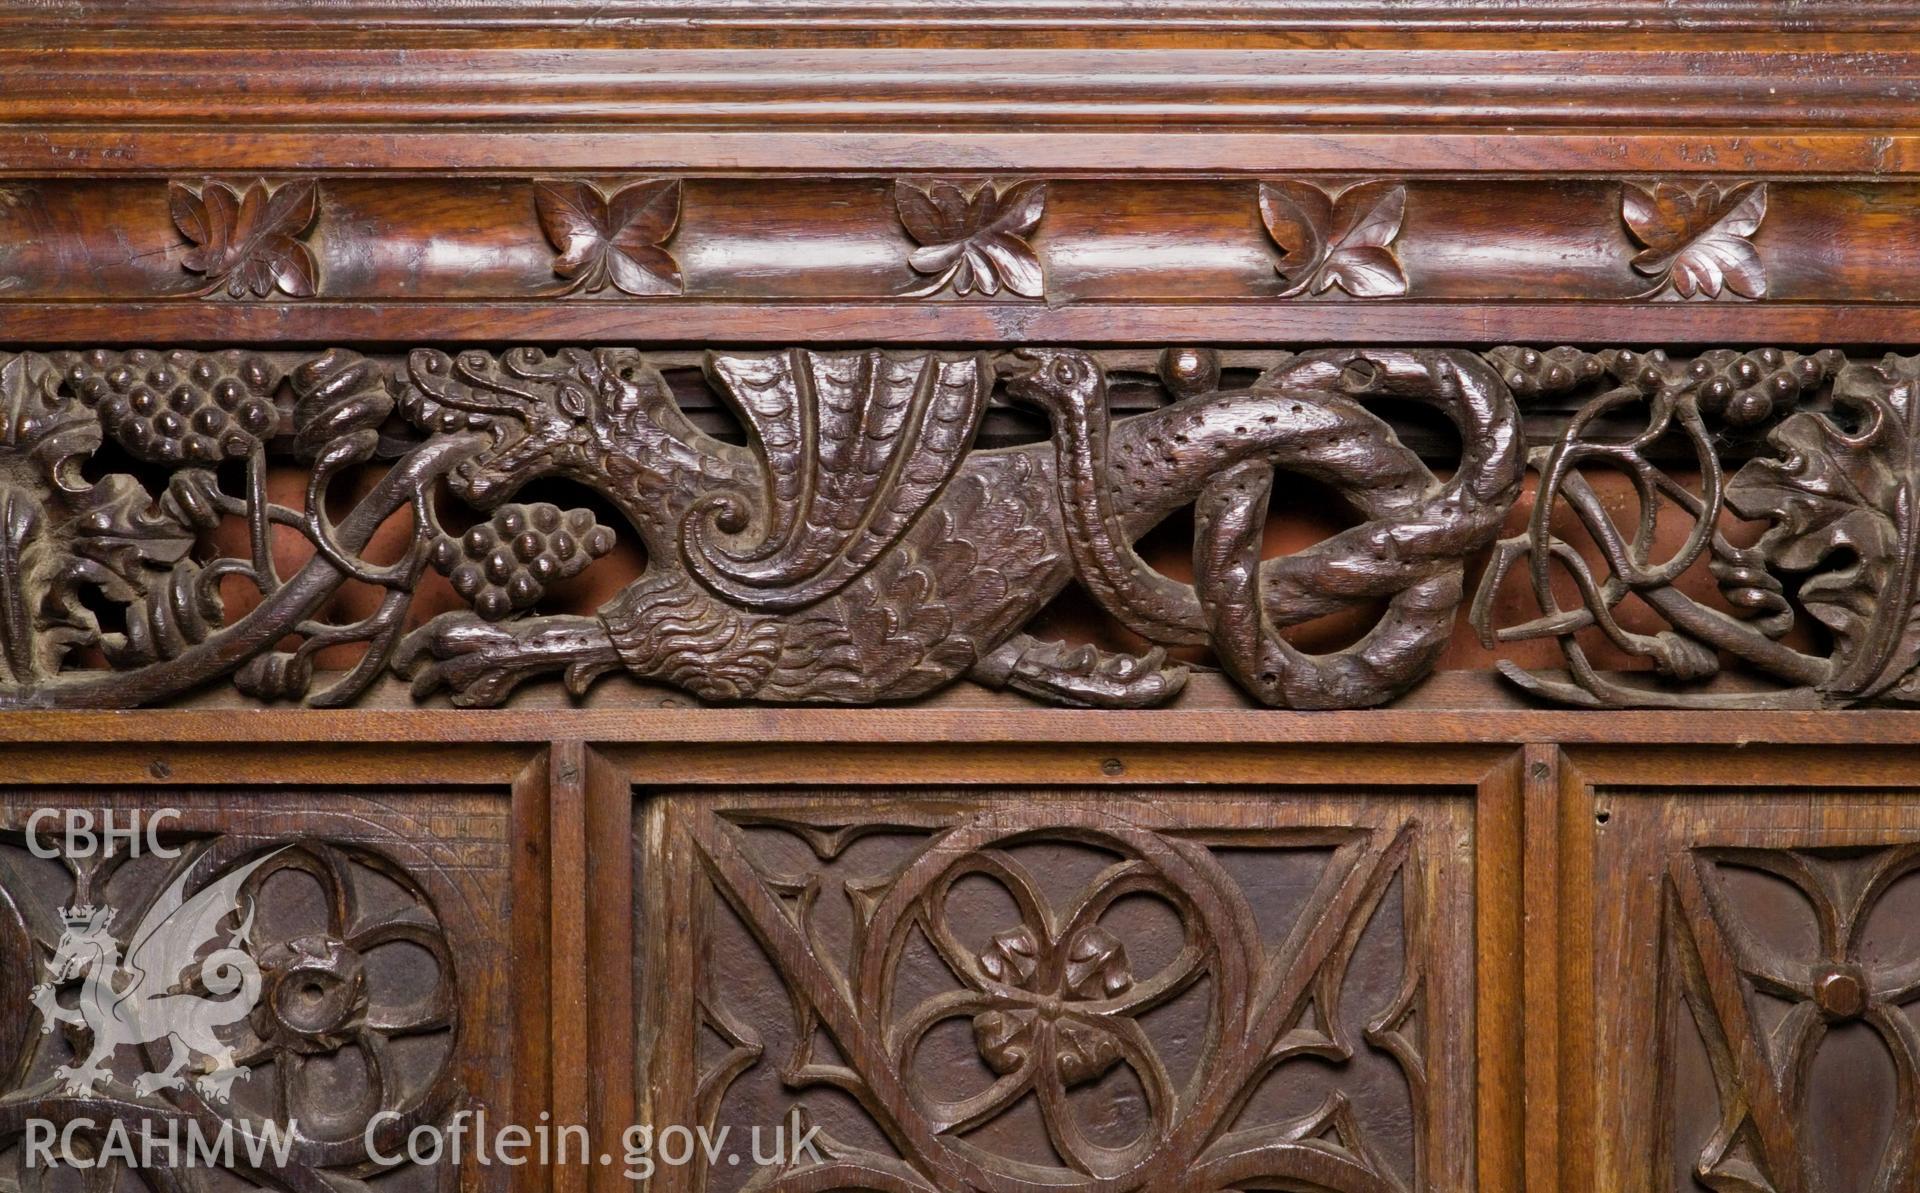 Mediaeval carving of dragon with serpents tail.